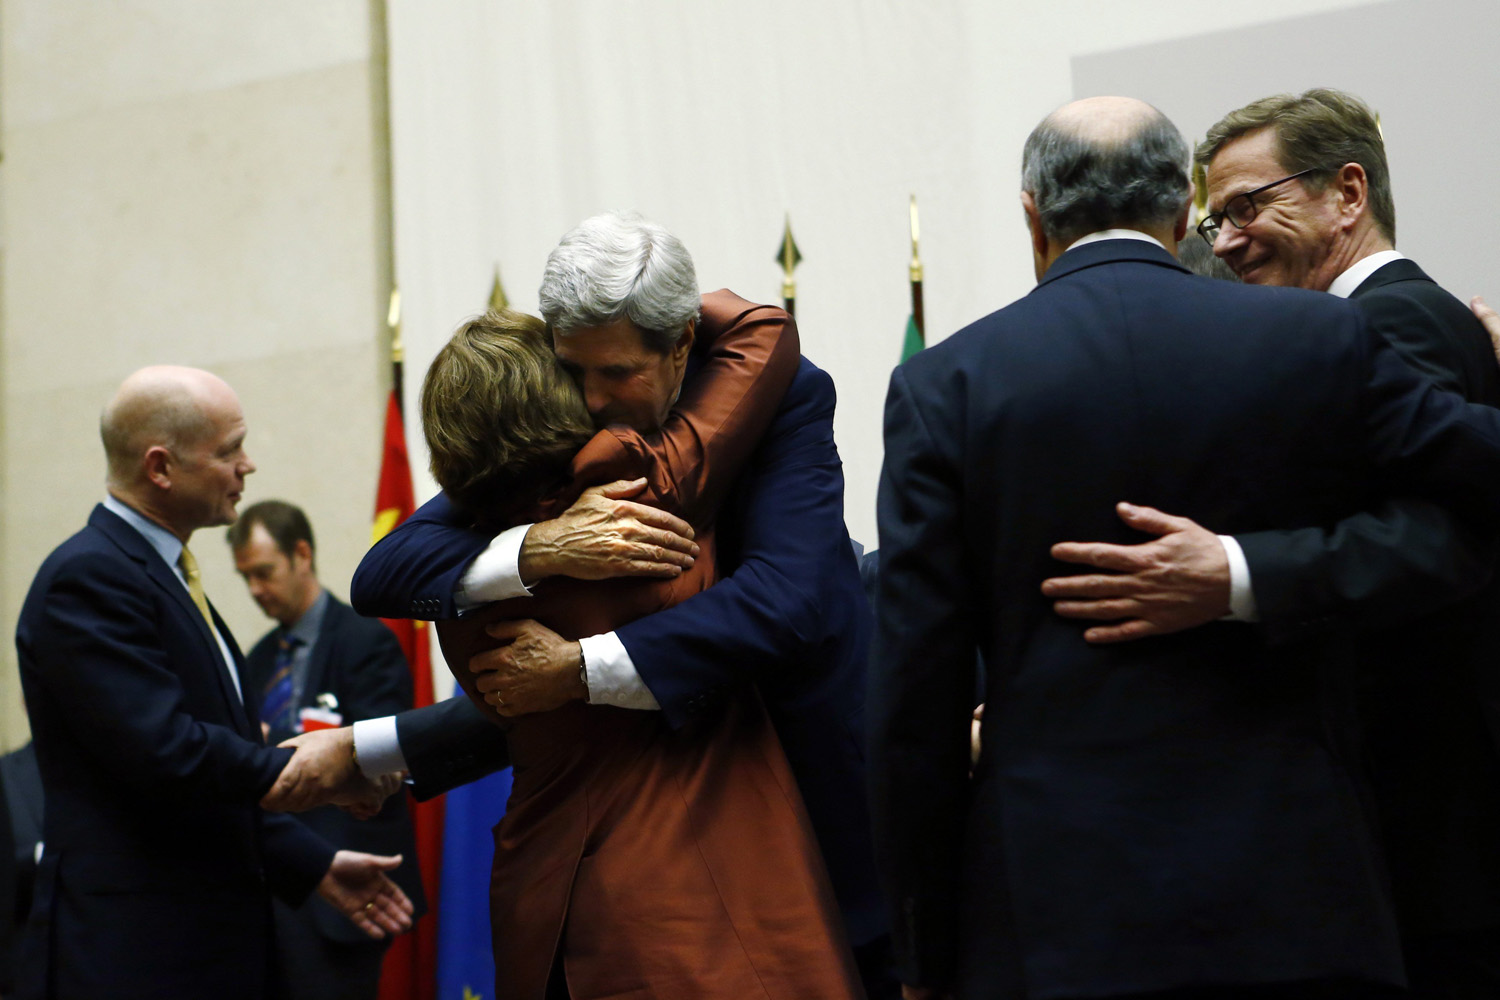 Nov. 24, 2013. U.S. Secretary of State John Kerry (3rd R) hugs European Union foreign policy chief Catherine Ashton after she delivered a statement during a ceremony next to British Foreign Secretary William Hague (L), Germany's Foreign Minister Guido Westerwelle (R) and French Foreign Affairs Minister Laurent Fabius at the United Nations in Geneva.